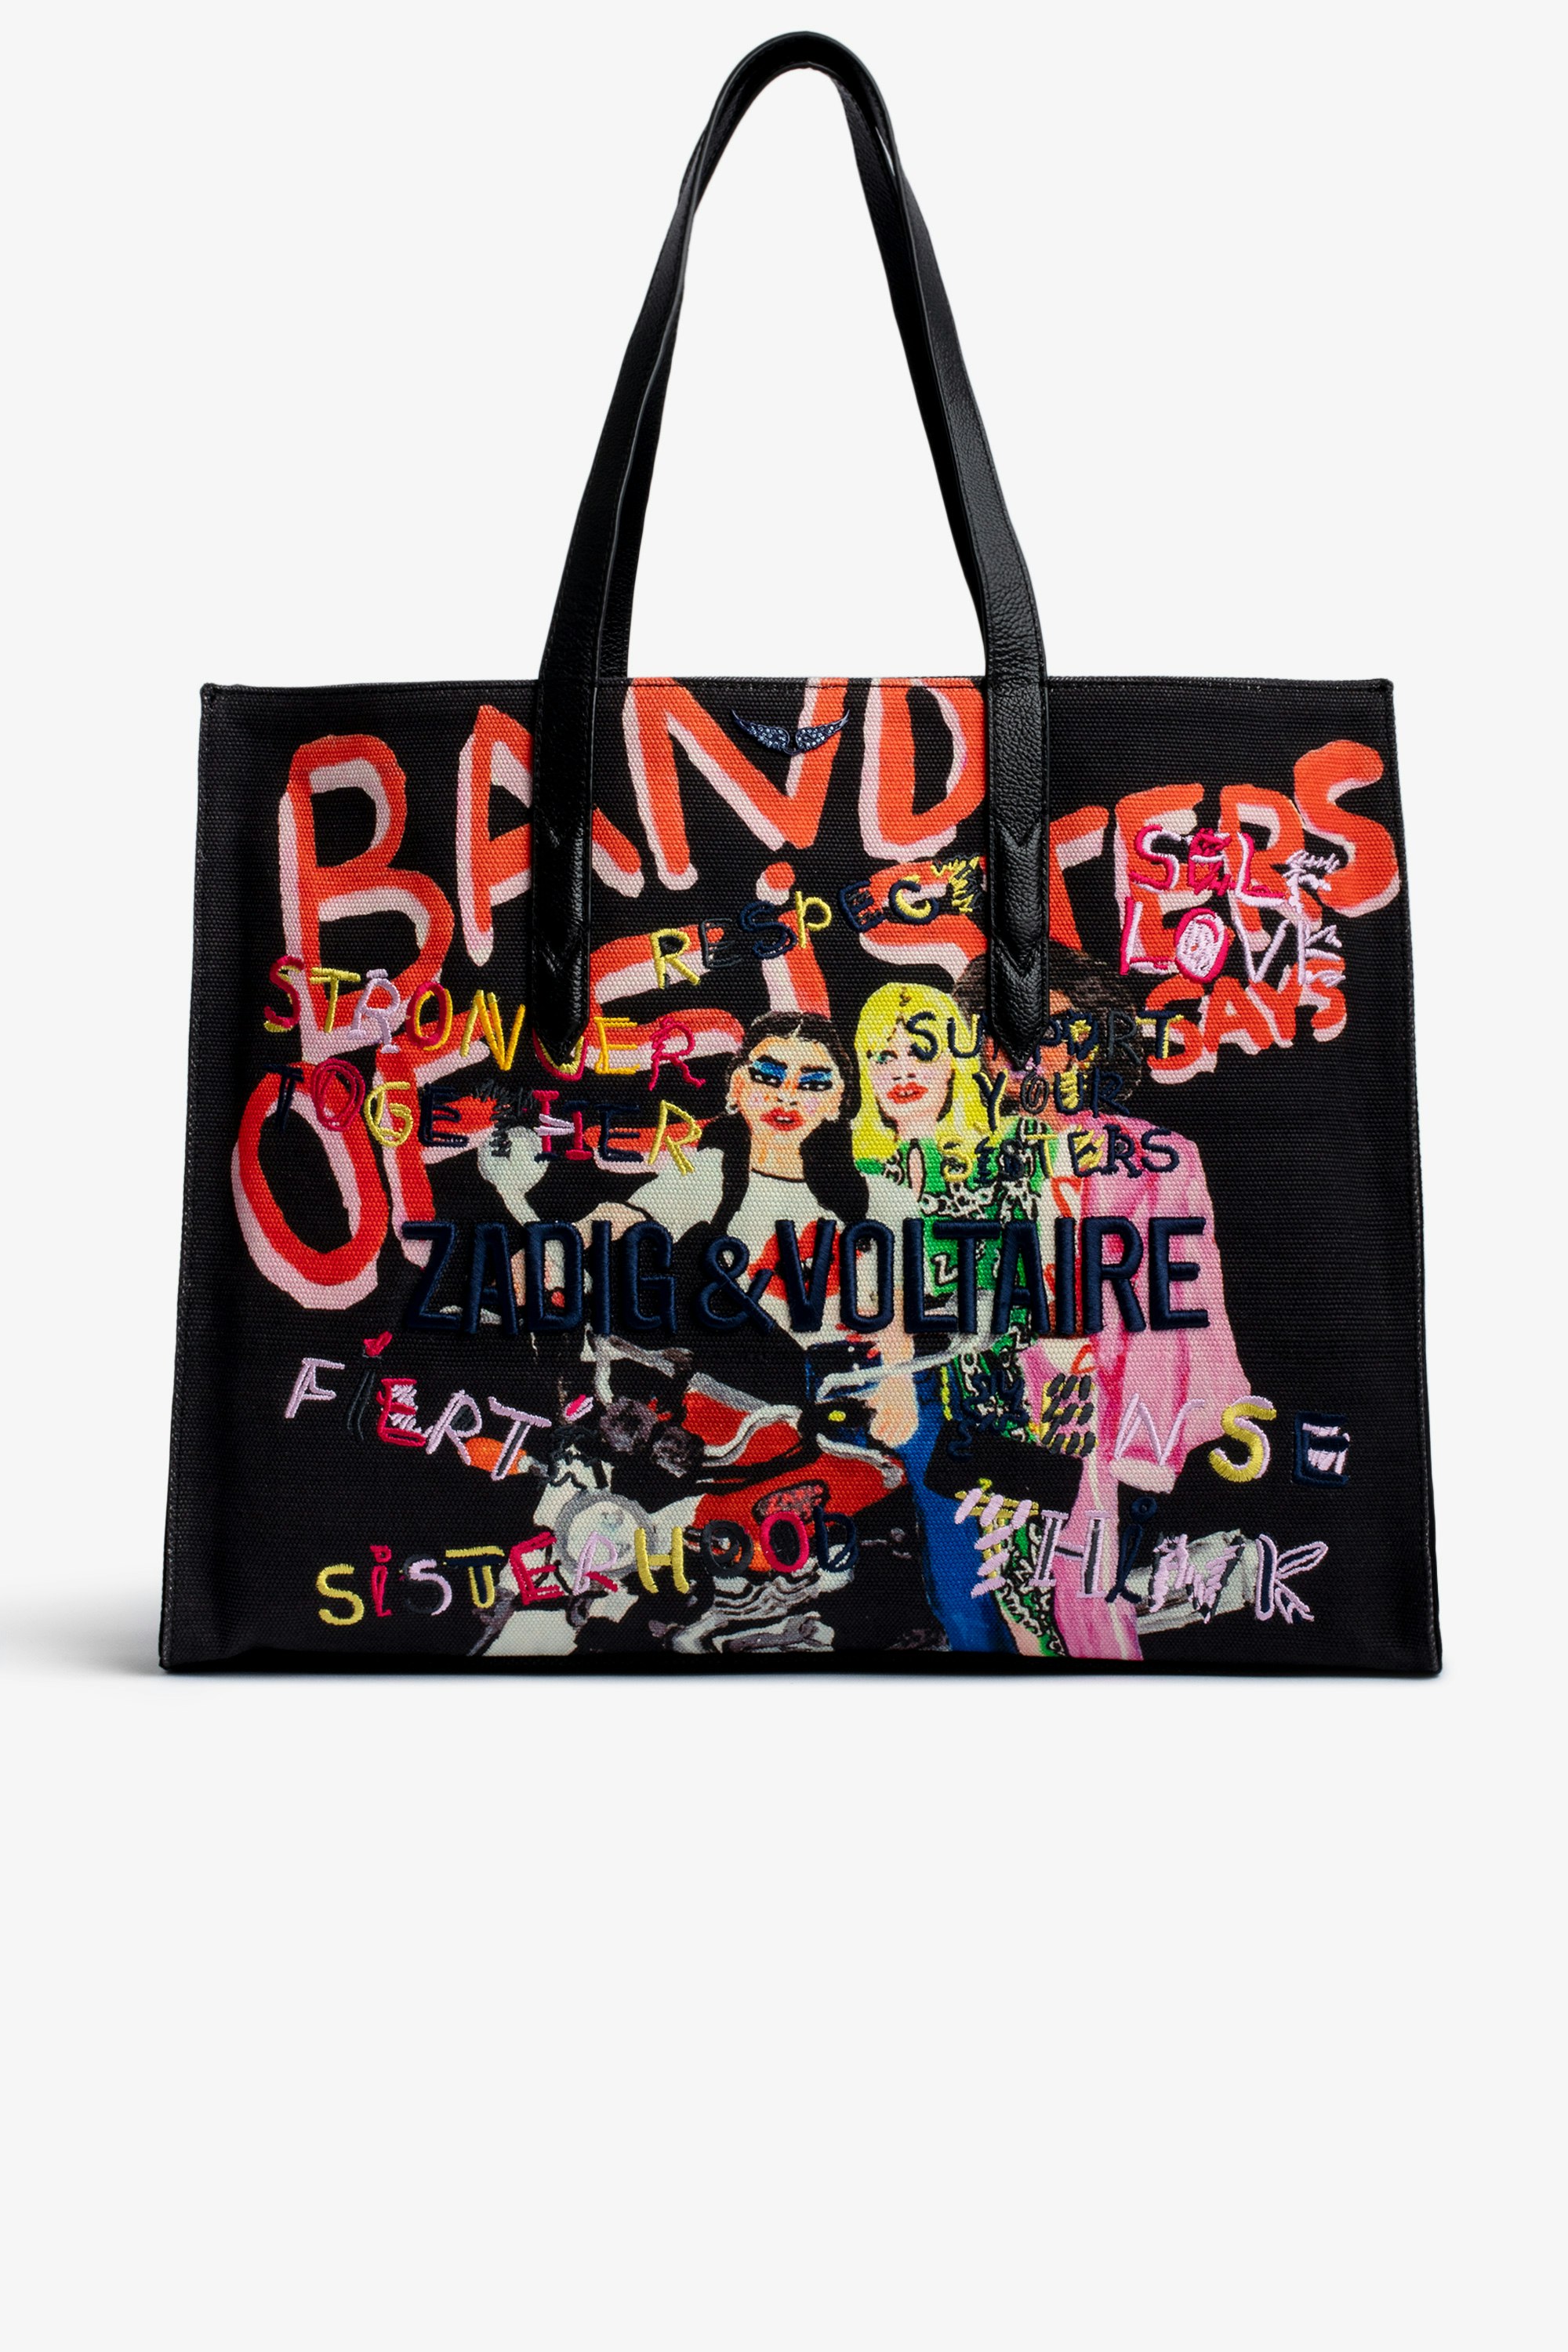 Band of Sisters le Tote Bag Women’s Band Of Sisters black cotton Le Tote bag